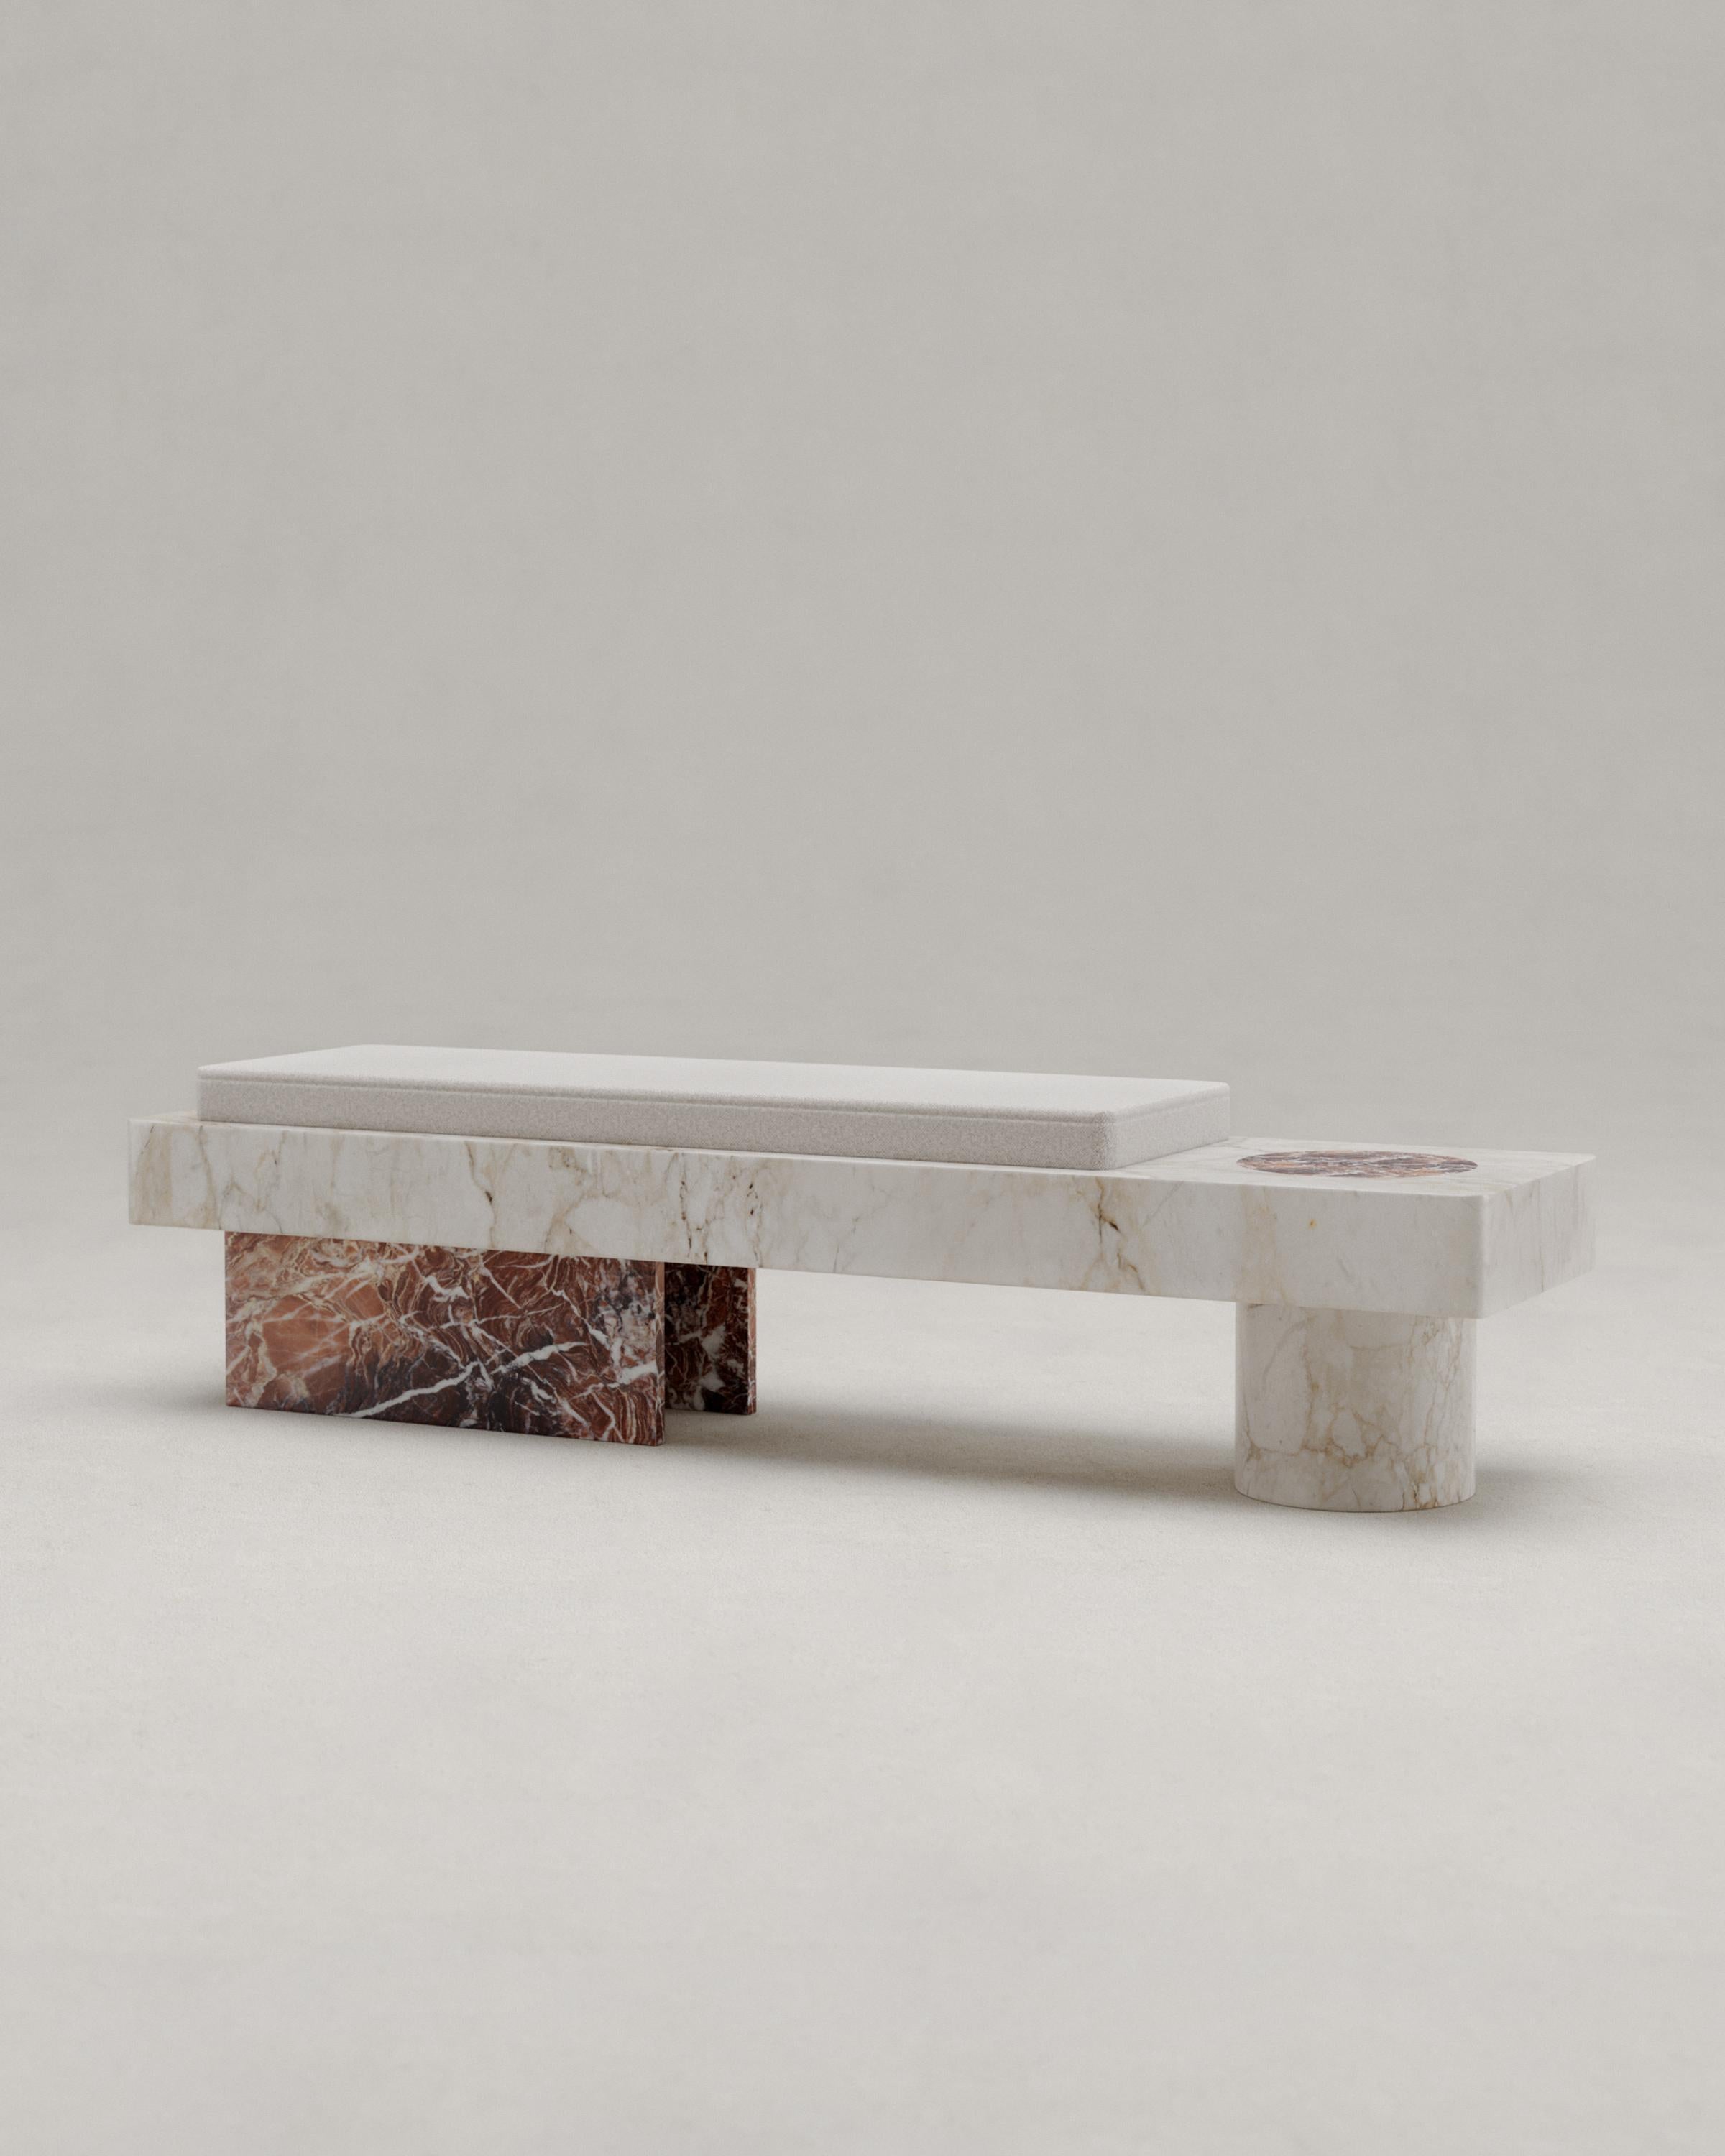 Salvante BS1 Bench by Piotr Dąbrowa
Unique Piece
Dimensions: W 160 x D 40 x H 40 cm
Materials: Calacatta marble, Rosa Peralba marble.
Also Available: Calacatta Viola marble, Walnut Burl.

Salvante collection is a play between shapes, materials &